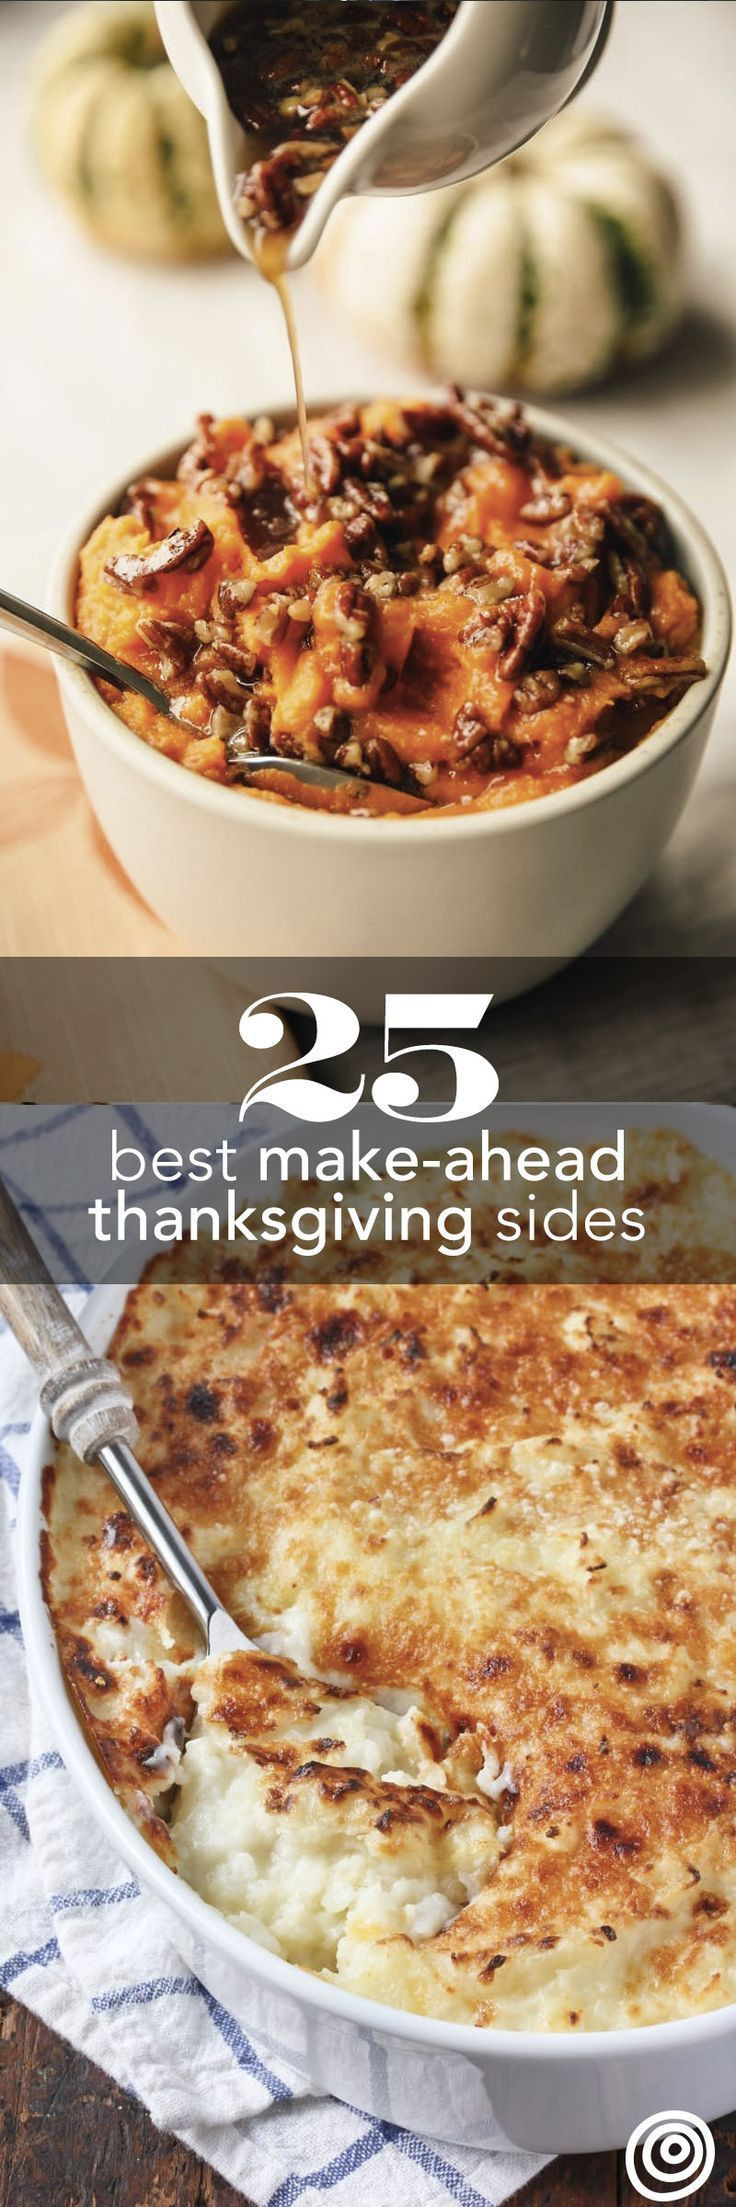 Thanksgiving Vegetables Make Ahead
 25 Thanksgiving Side Dishes You Can Make Ahead of Time